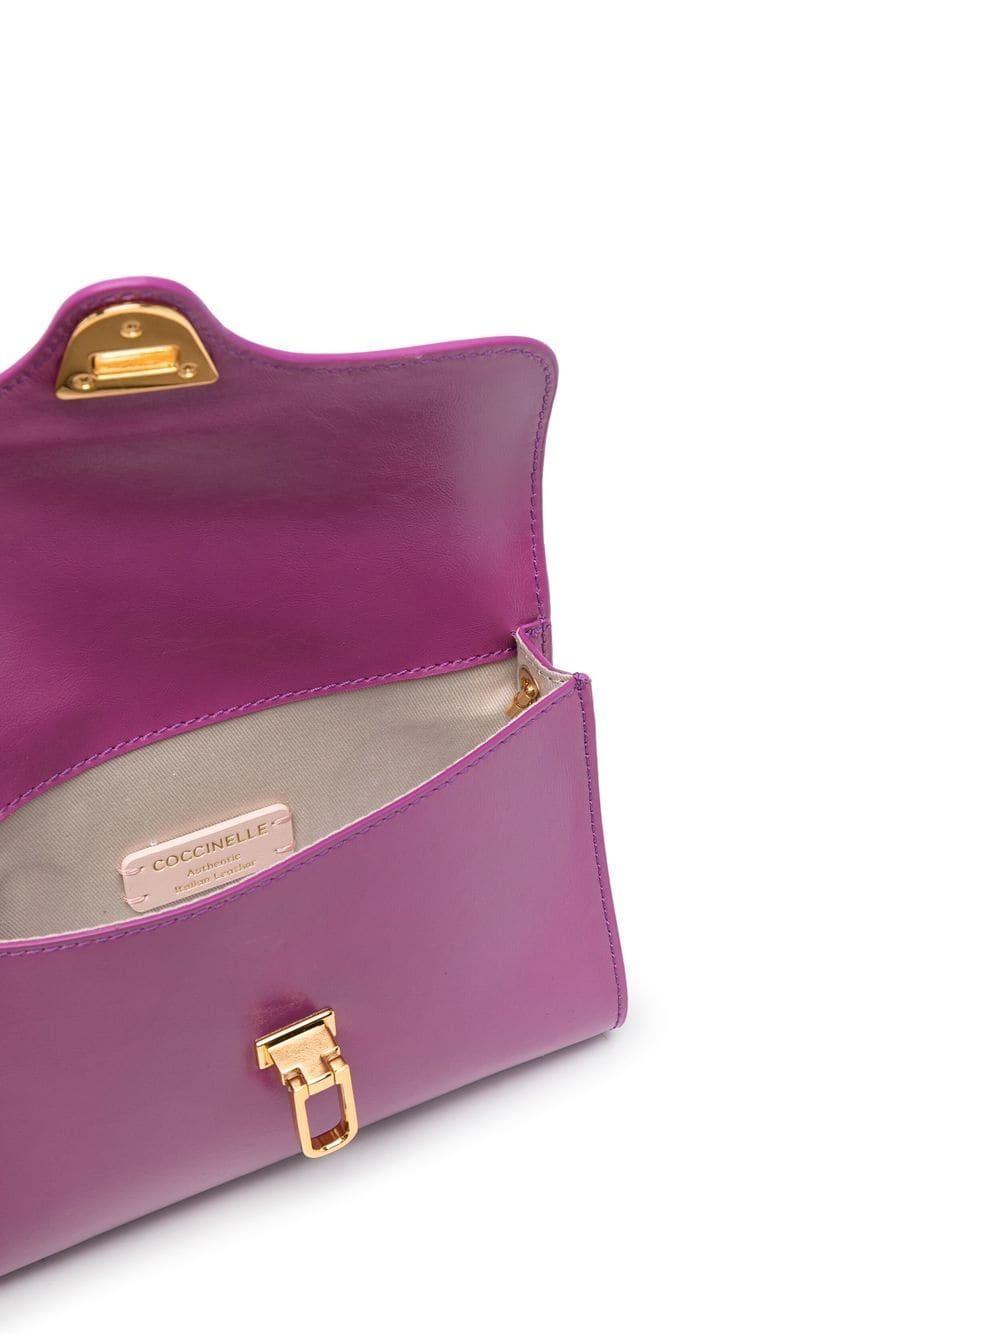 Coccinelle Chain-strap Leather Crossbody Bag in Purple | Lyst